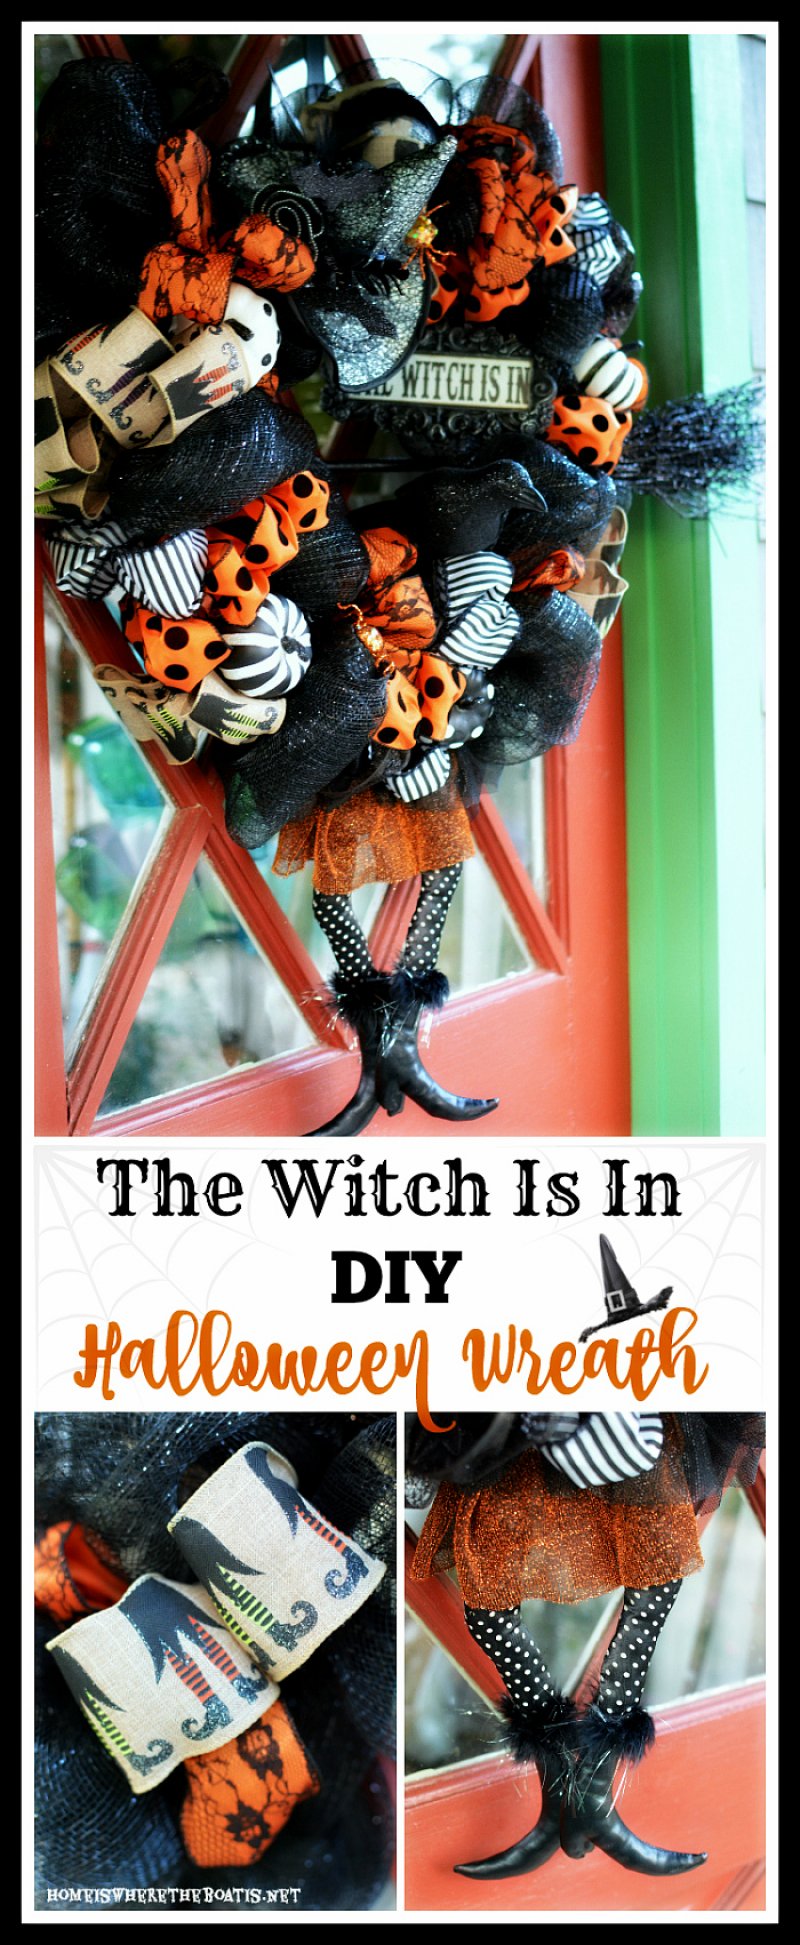 The Witch is In DIY Halloween Wreath